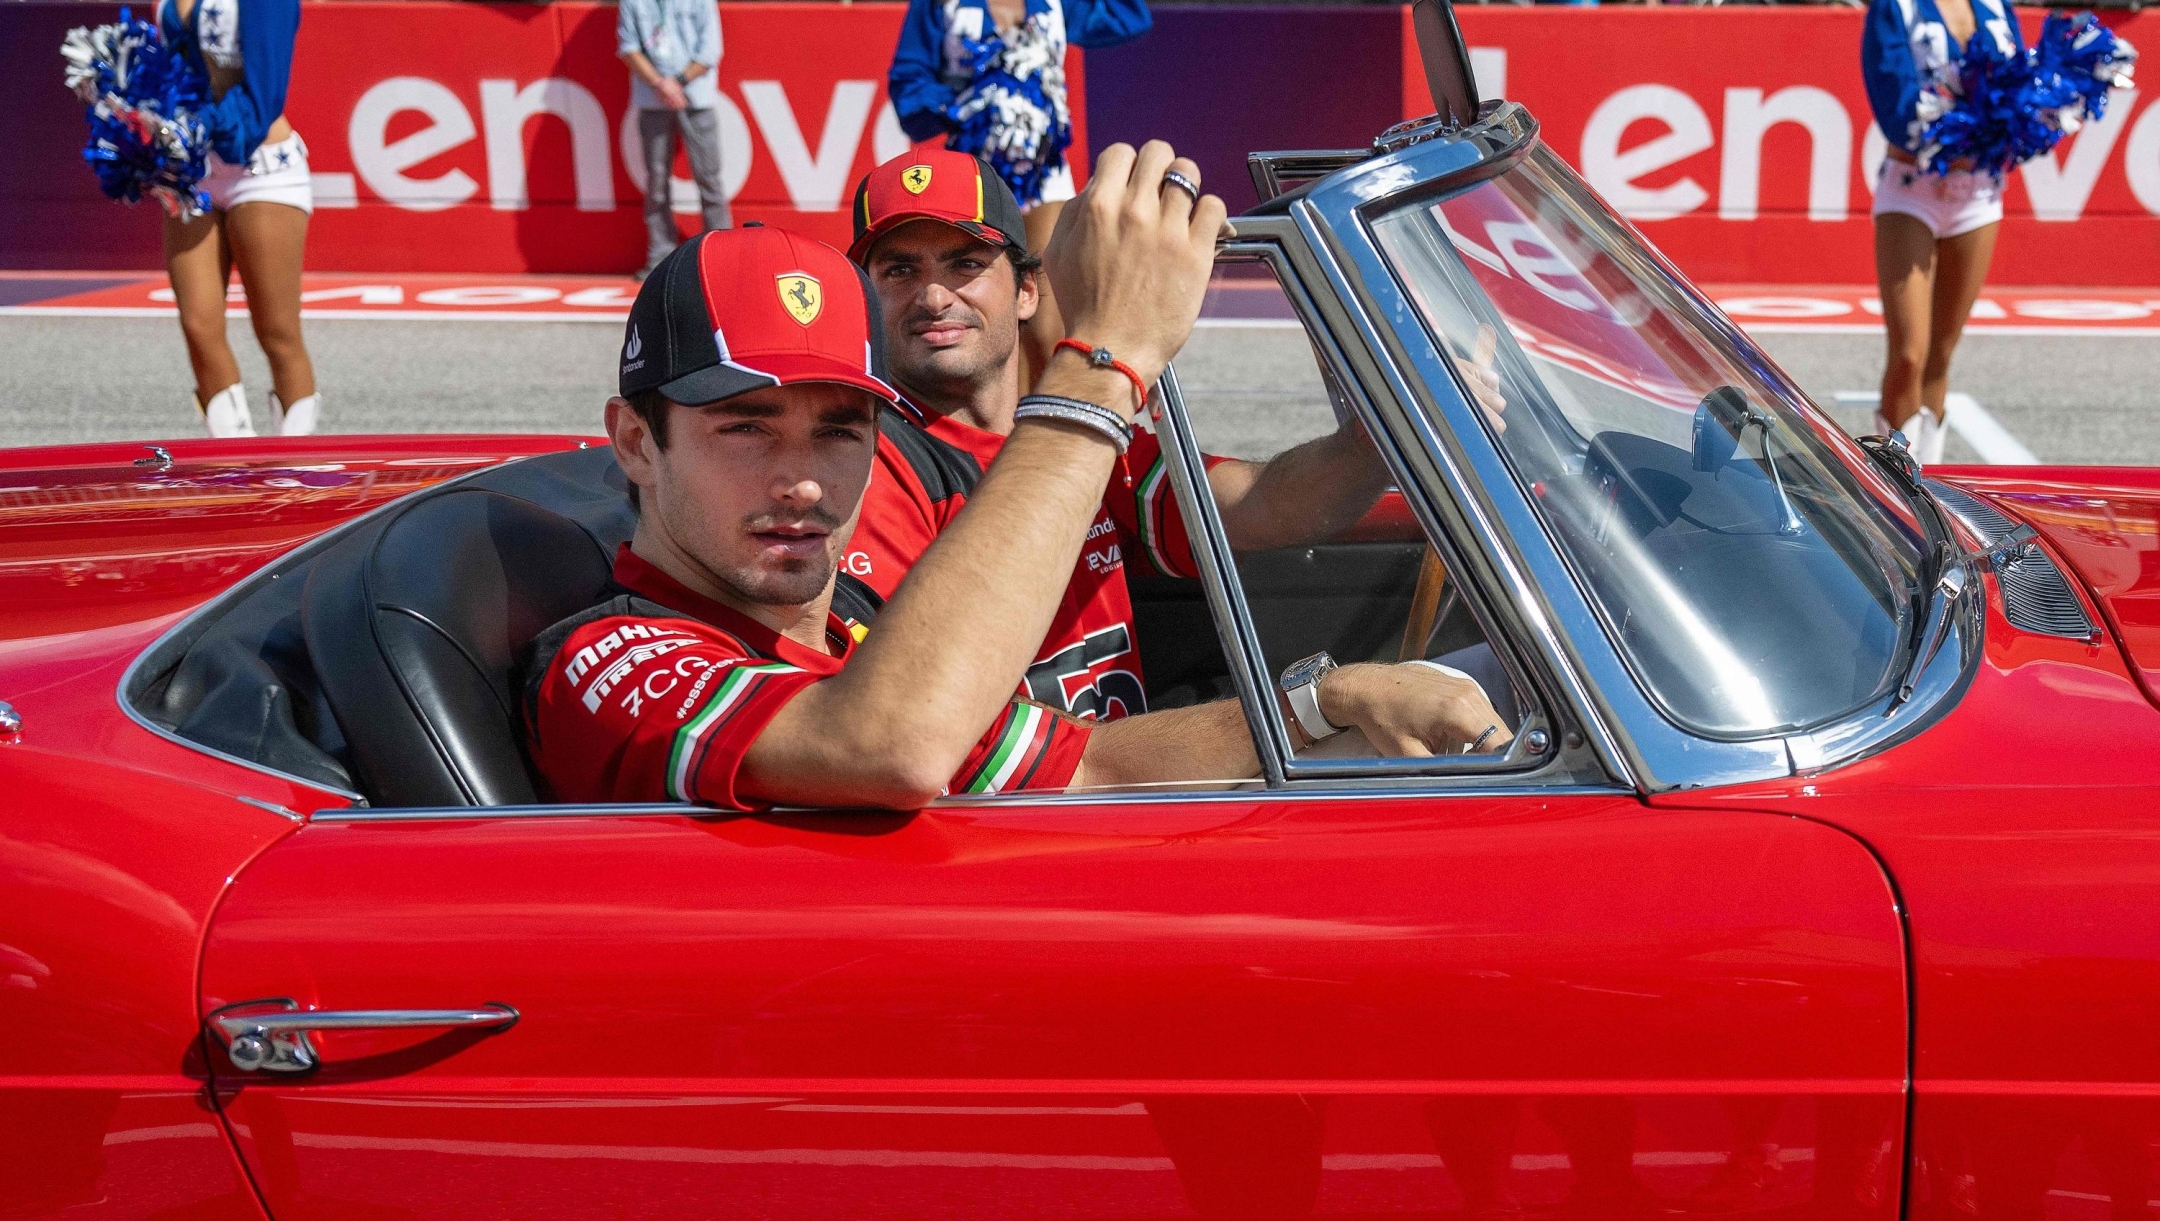 Ferrari's Monegasque driver Charles Leclerc and Ferrari's Spanish driver Carlos Sainz Jr., take part in the drivers' parade ahead the 2023 United States Formula One Grand Prix at the Circuit of the Americas in Austin, Texas, on October 22, 2023. (Photo by Jim WATSON / AFP)